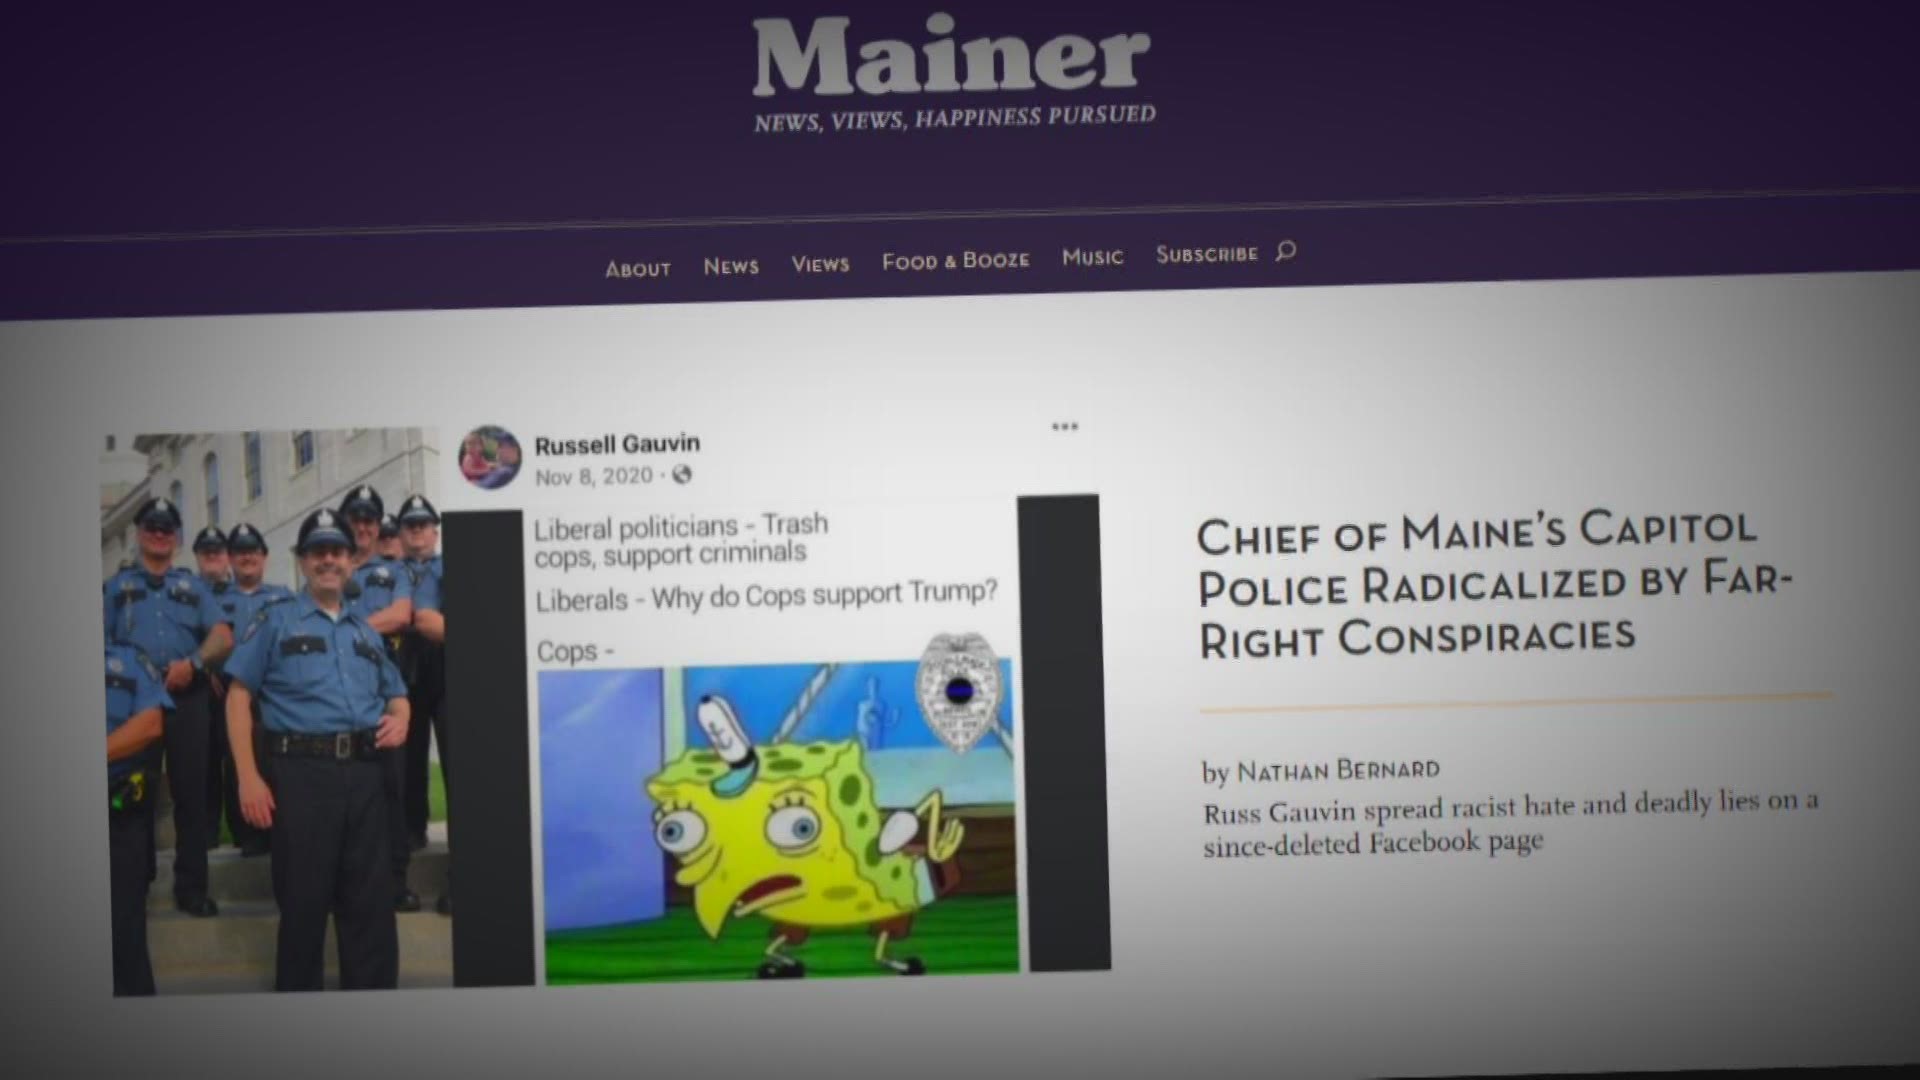 The head of Maine's Capitol Police Force is apologizing for social media posts ridiculing democrats.